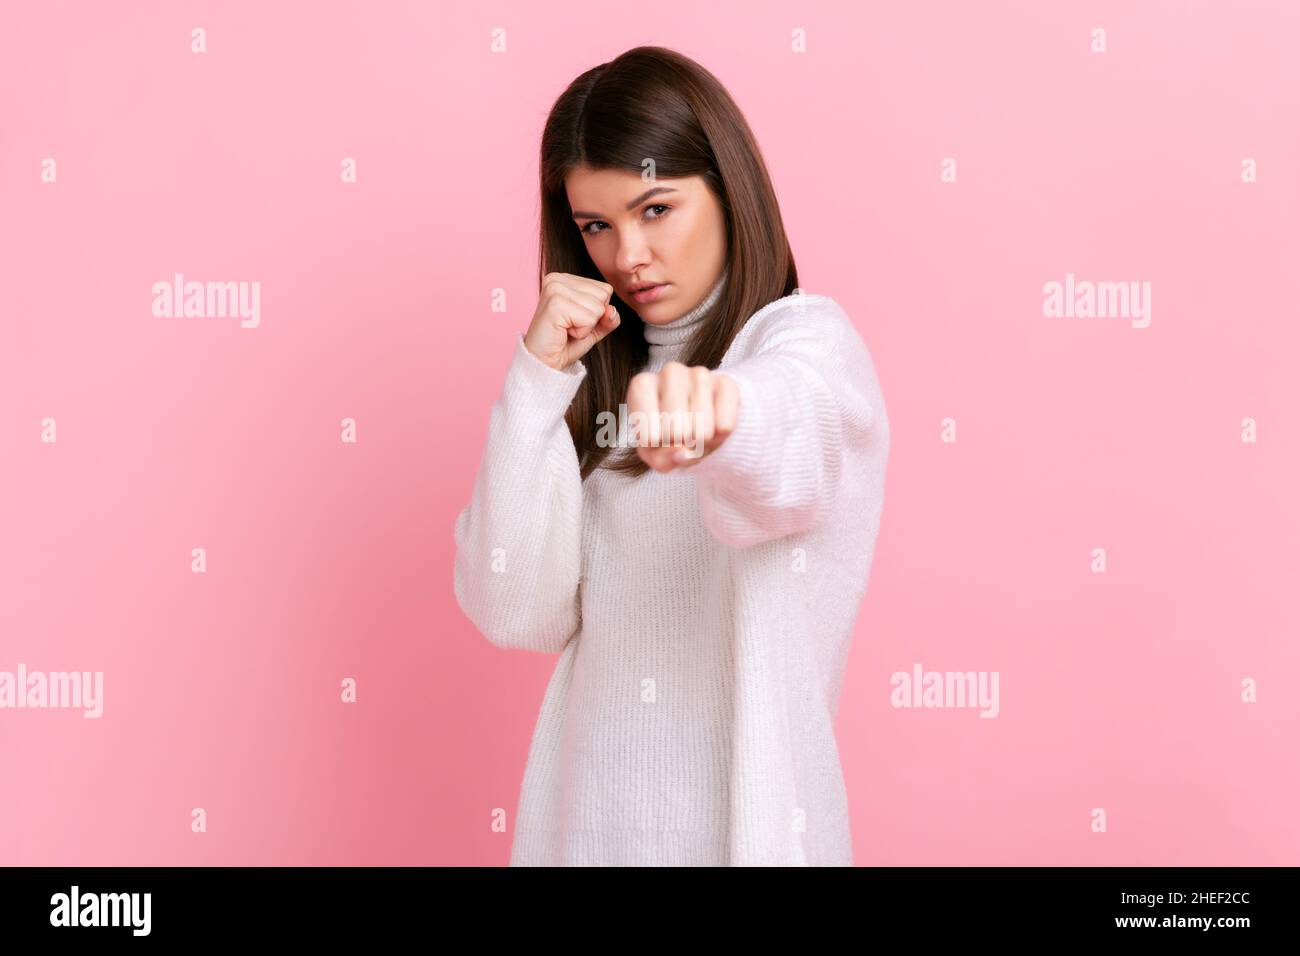 Aggressive angry woman with dark hair being ready to fight, boxing to camera with clenched fists, wearing white casual style sweater. Indoor studio shot isolated on pink background. Stock Photo